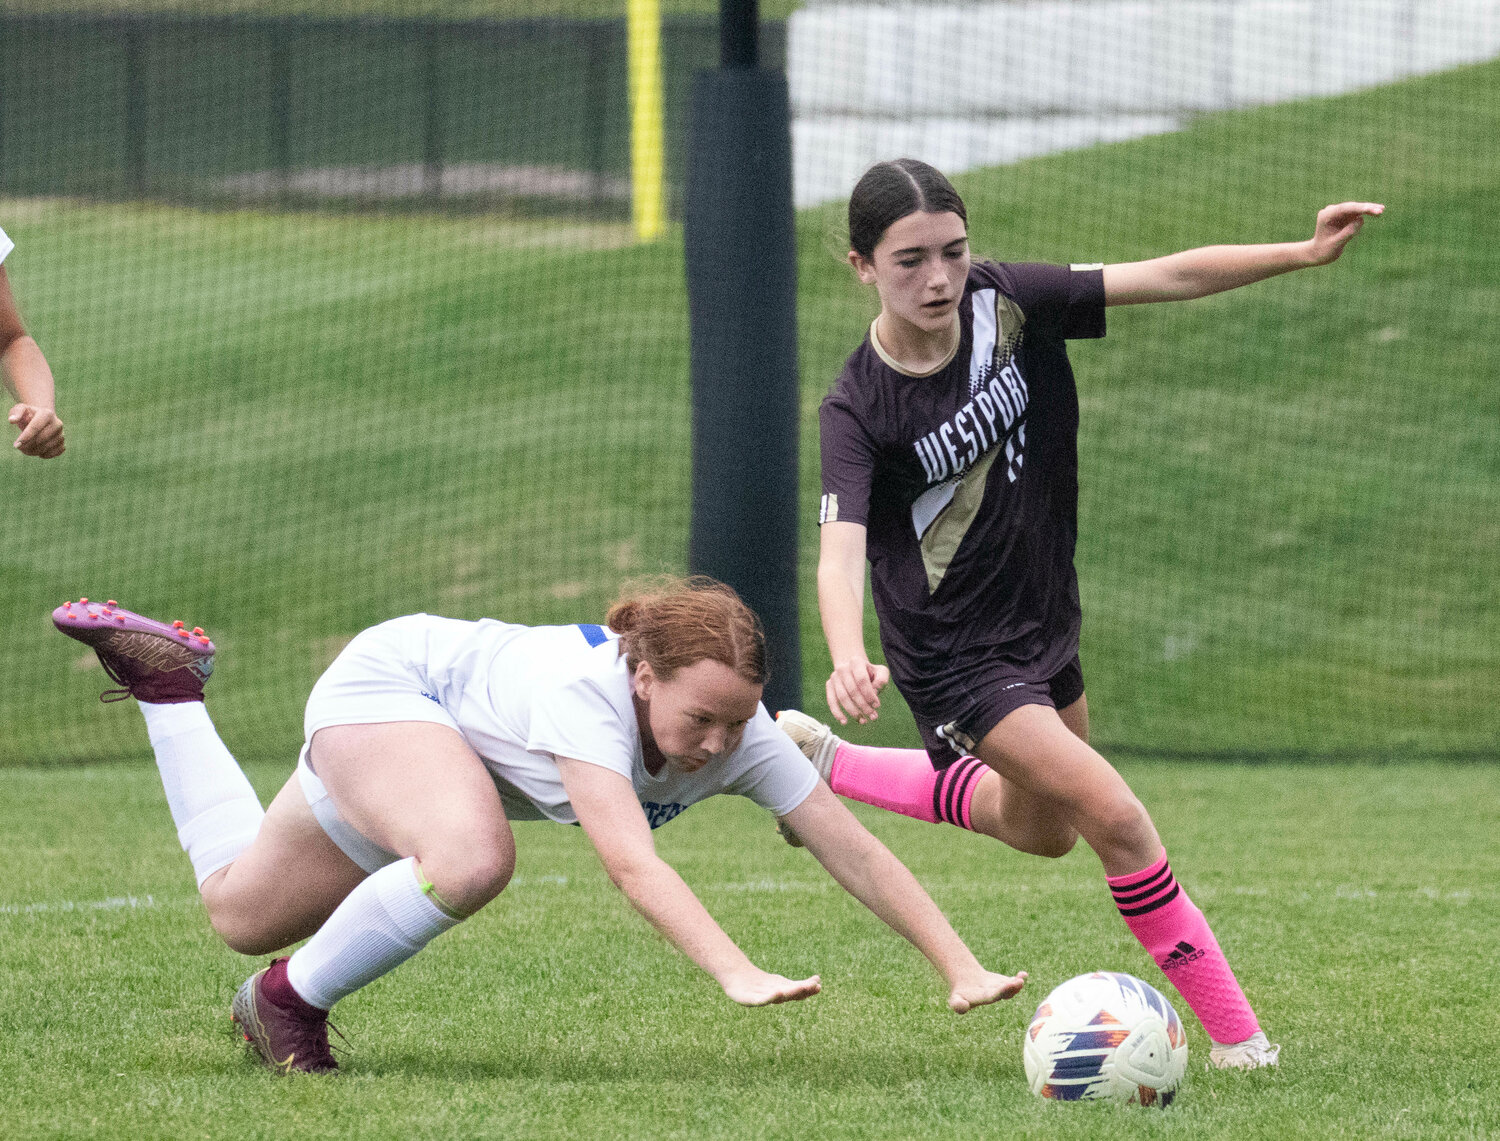 Sophia Nickelson dribbles around a Southeastern defender after collecting a pass from Harper Thibodeau.